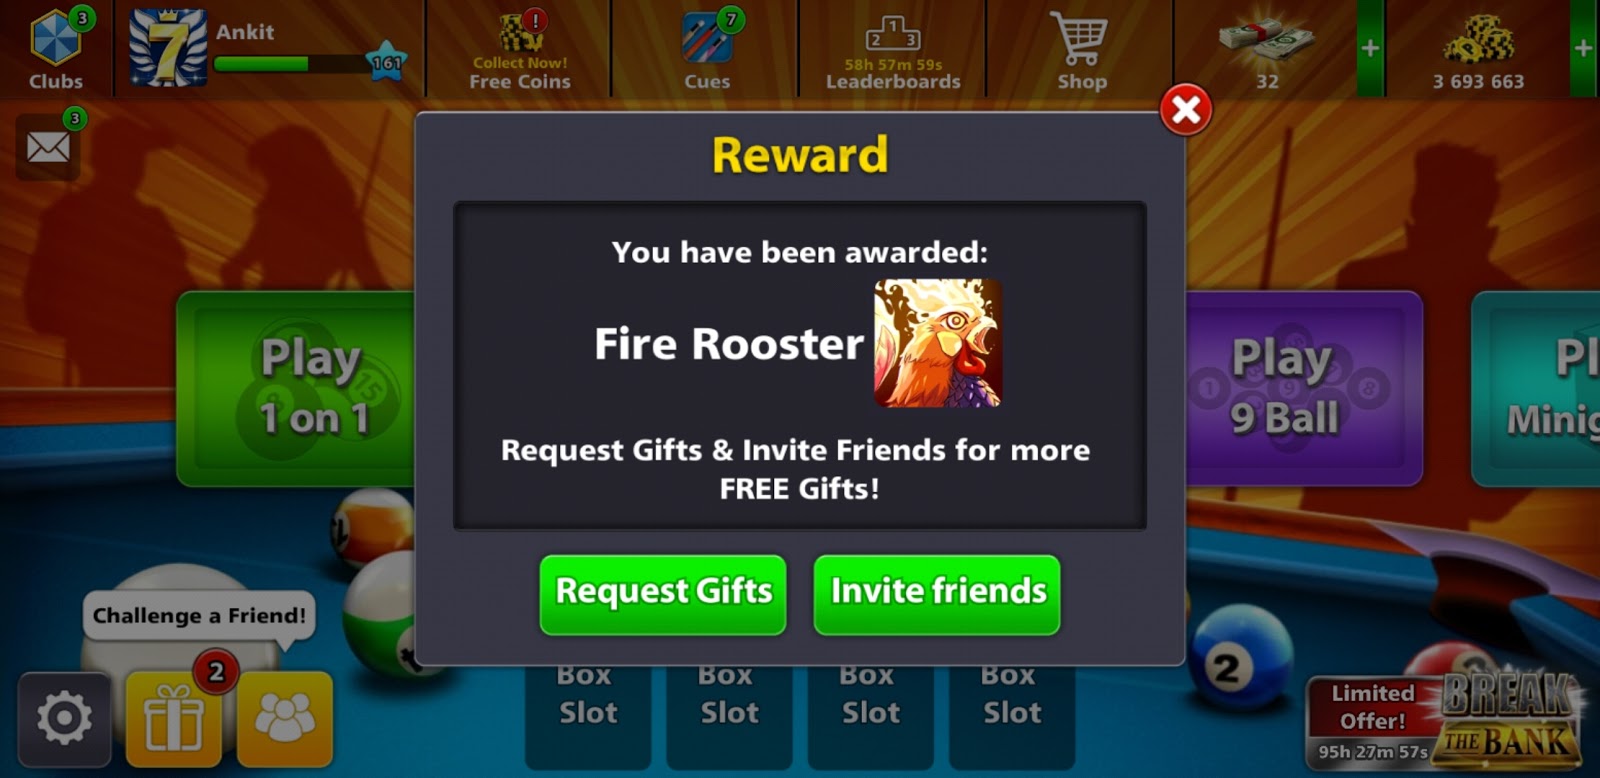 8 BALL POOL REWARD LINKS + FREE ROOSTER AVATAR + FREE COINS ... - 